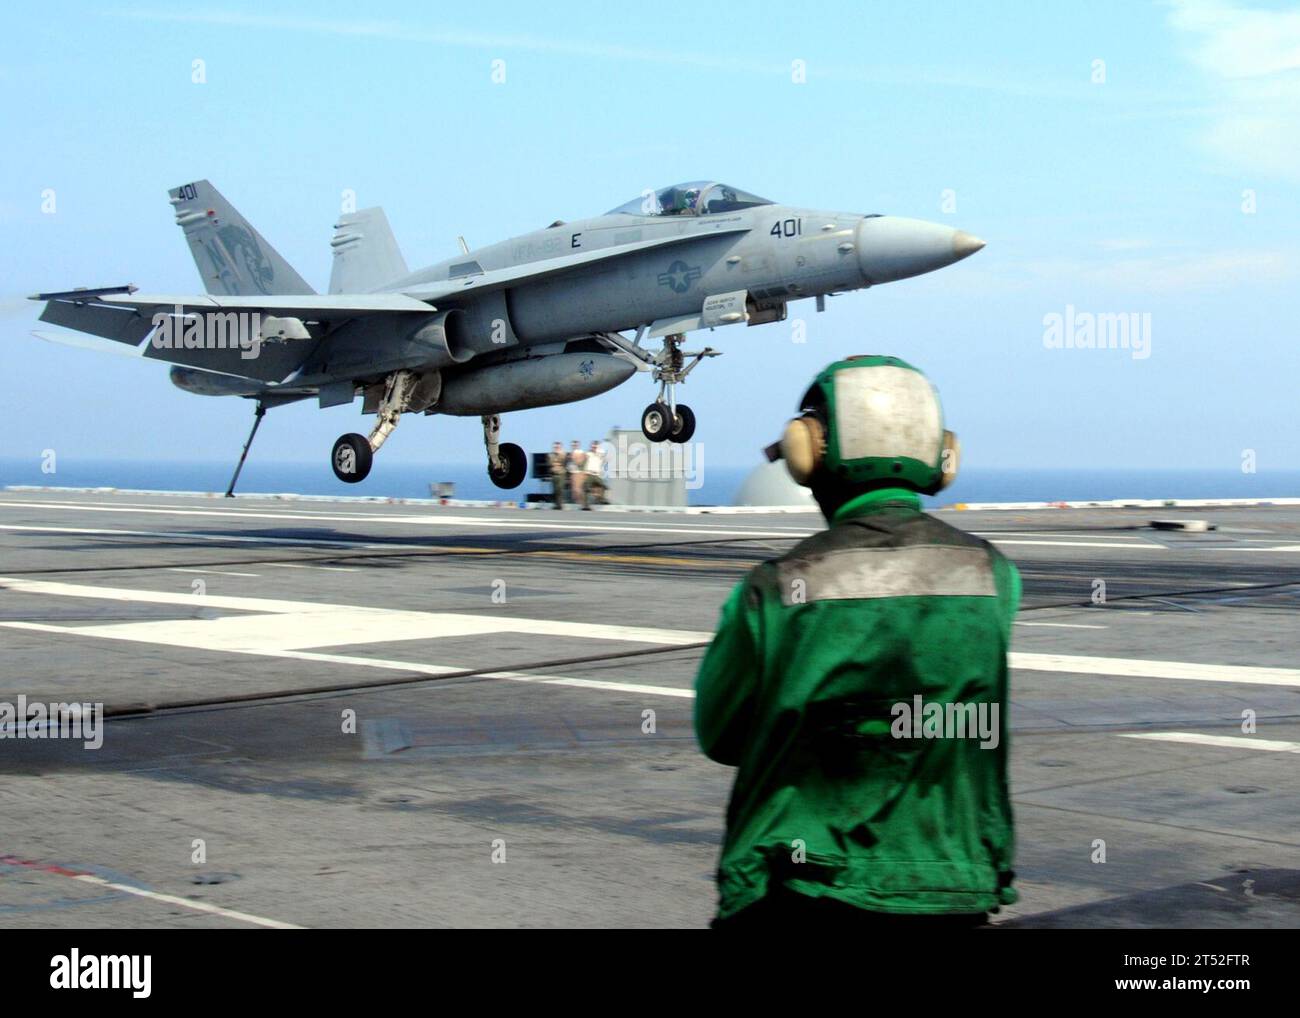 1007155446H-545 ATLANTIC OCEAN (July 15, 2010) A Sailor assigned to the aircraft carrier USS George H.W. Bush (CVN 77) watches as an F/A-18A Hornet assigned to the Golden Warriors of Strike Fighter Squadron (VFA) 87 lands on the flight deck. George H.W. Bush is conducting training in the Atlantic Ocean. (U.S. Navy Stock Photo